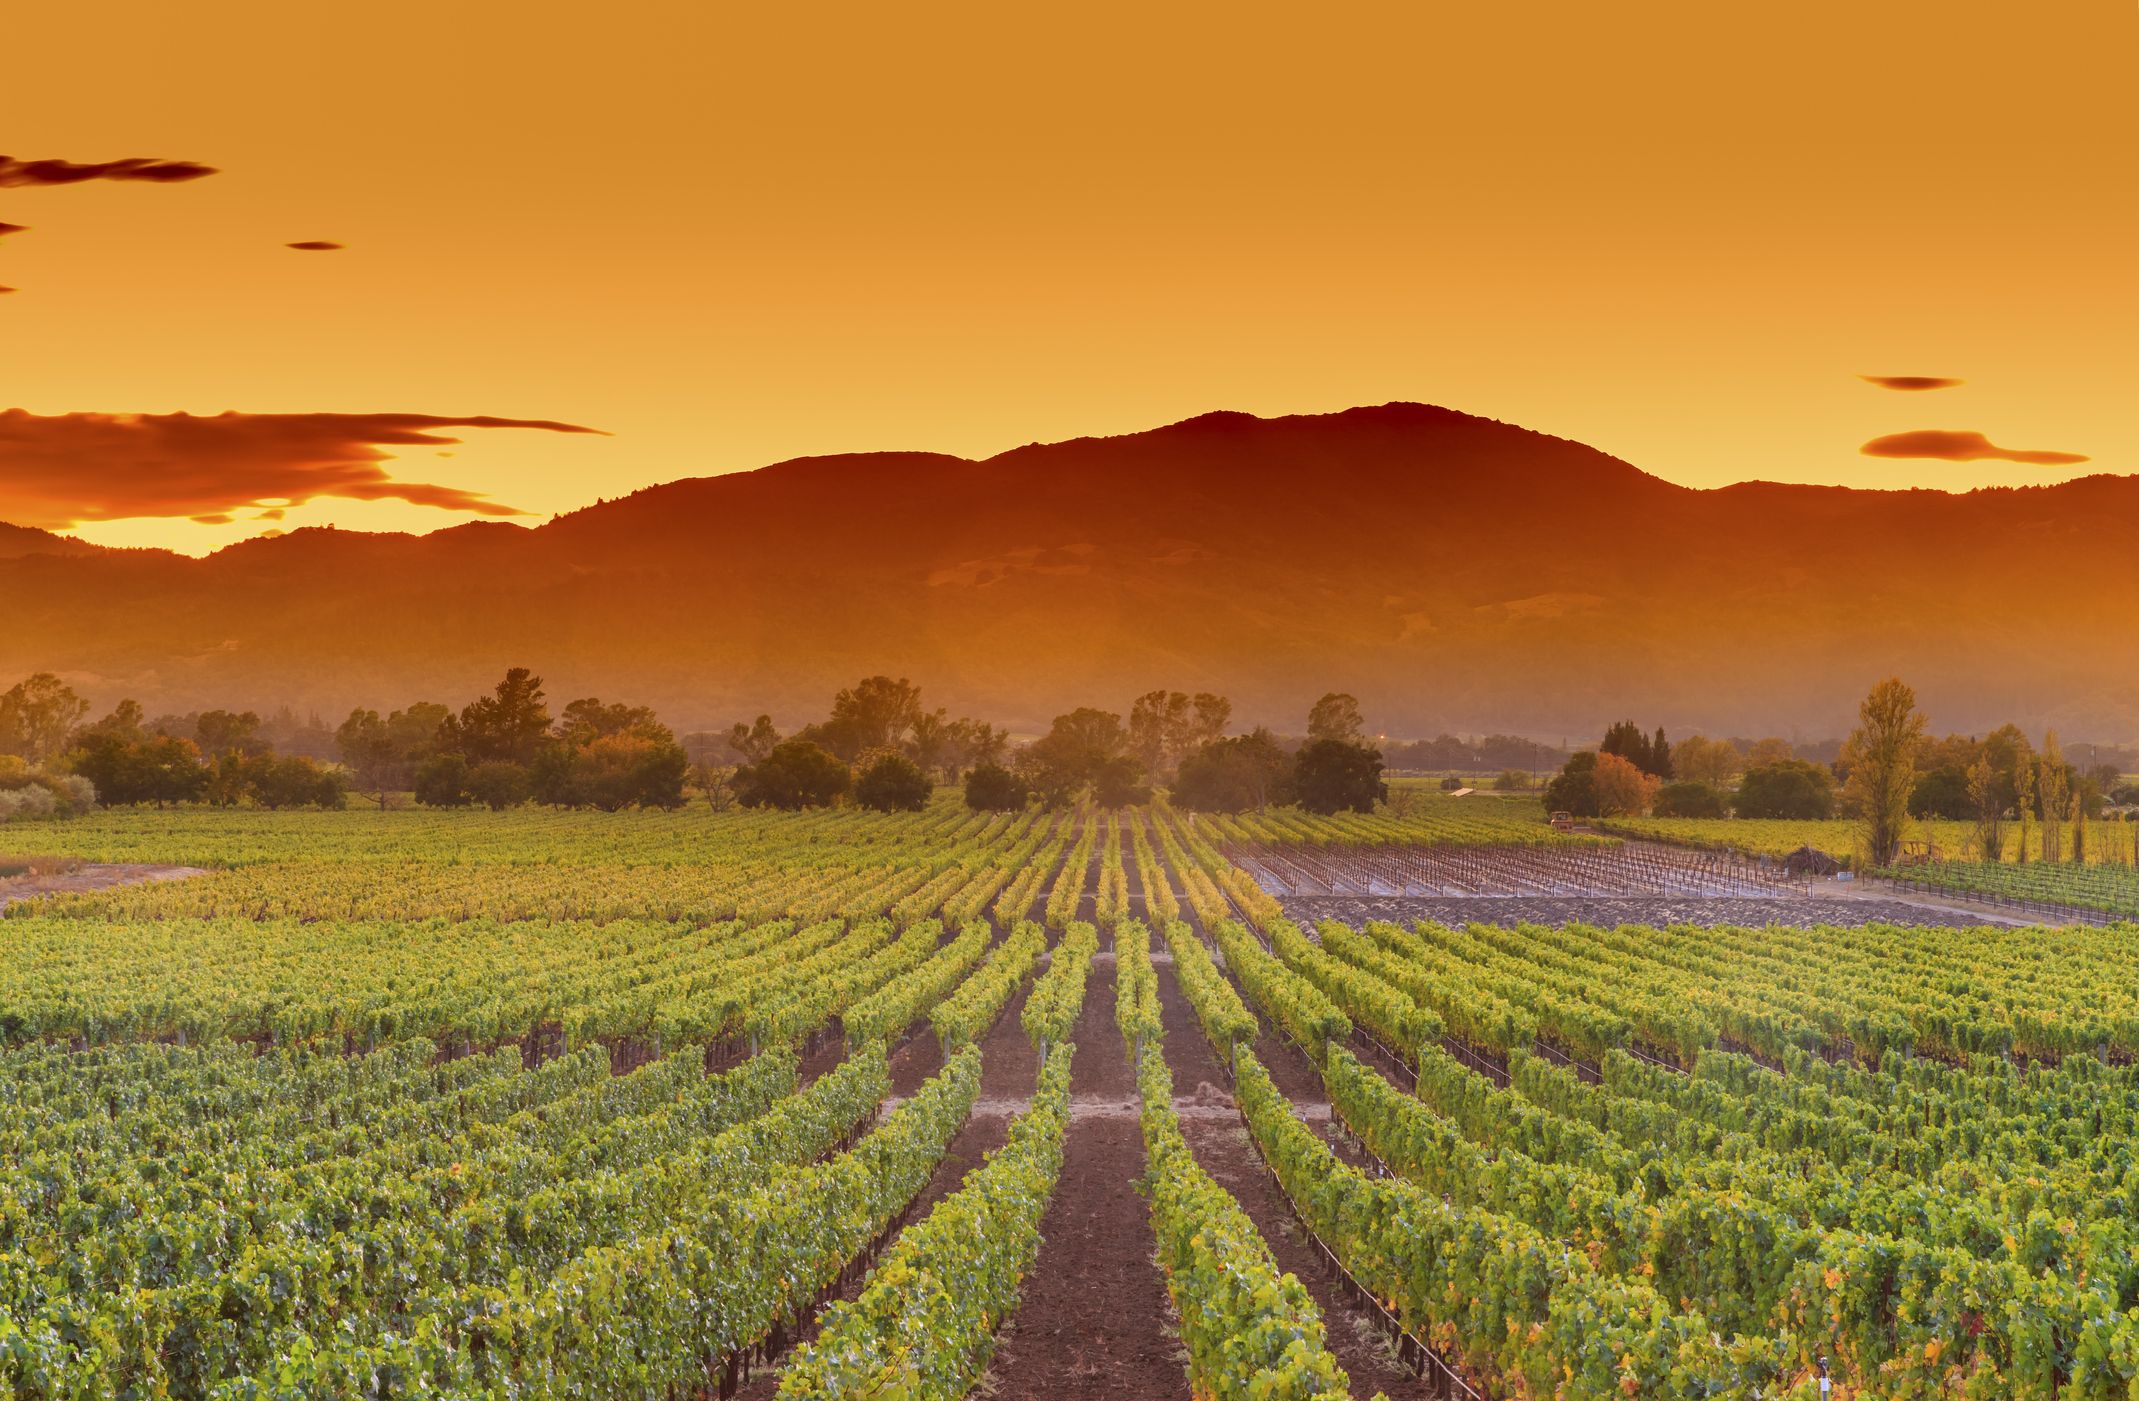 <p>Welcome to VERANDA's <a href="https://www.veranda.com/travel/weekend-guides/">Perfect Weekend</a>, where we show you how to make the most of 48 hours in one of our favorite destinations. This month, we’re Napa-bound to relax and unwind in one of the world’s premier wine-growing regions. Renowned for its vine-covered rolling hills and the exquisite wine that’s a result of the labored landscape, Napa is the ultimate U.S. destination for wine lovers—but make no mistake, the valley has so much more to offer than delicious bottles of vino. </p><p>From a shocking number of Michelin-rated and -starred restaurants and beautiful architecture in the form of tasting rooms to lavish spas nestled among the valley’s verdant landscape and a recently re-developed downtown that cost a whopping $30 million to bring to life, Napa has it all. But be warned: With so much to do in the valley, a quick weekend trip may feel like a tease. Nevertheless, keep reading to learn how to have the perfect weekend in Napa. By the end of it, we have a sneaking suspicion that you’ll be eager to book your next visit. </p>